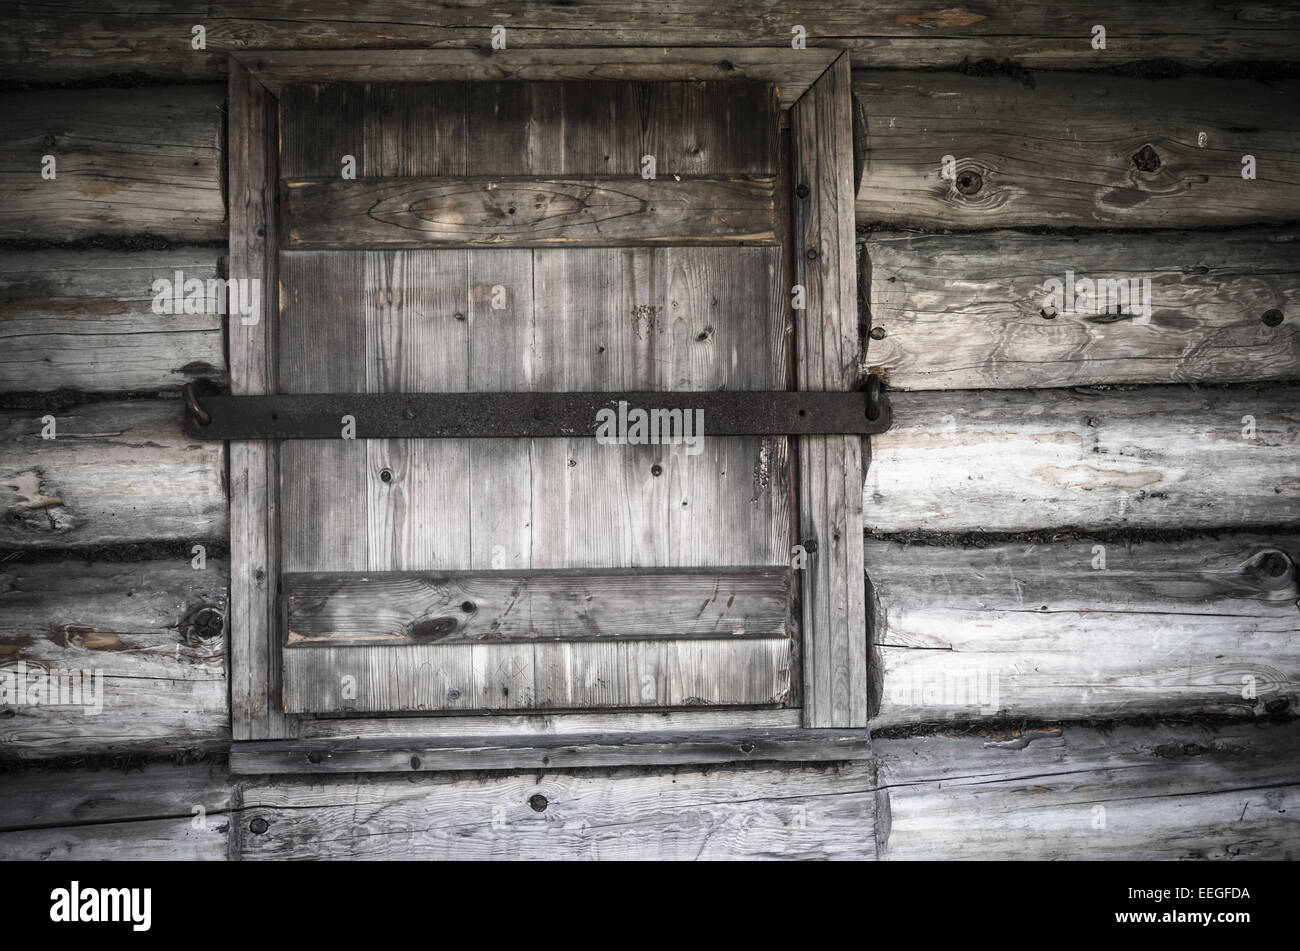 Old wooden window shutters closed, close-up Stock Photo